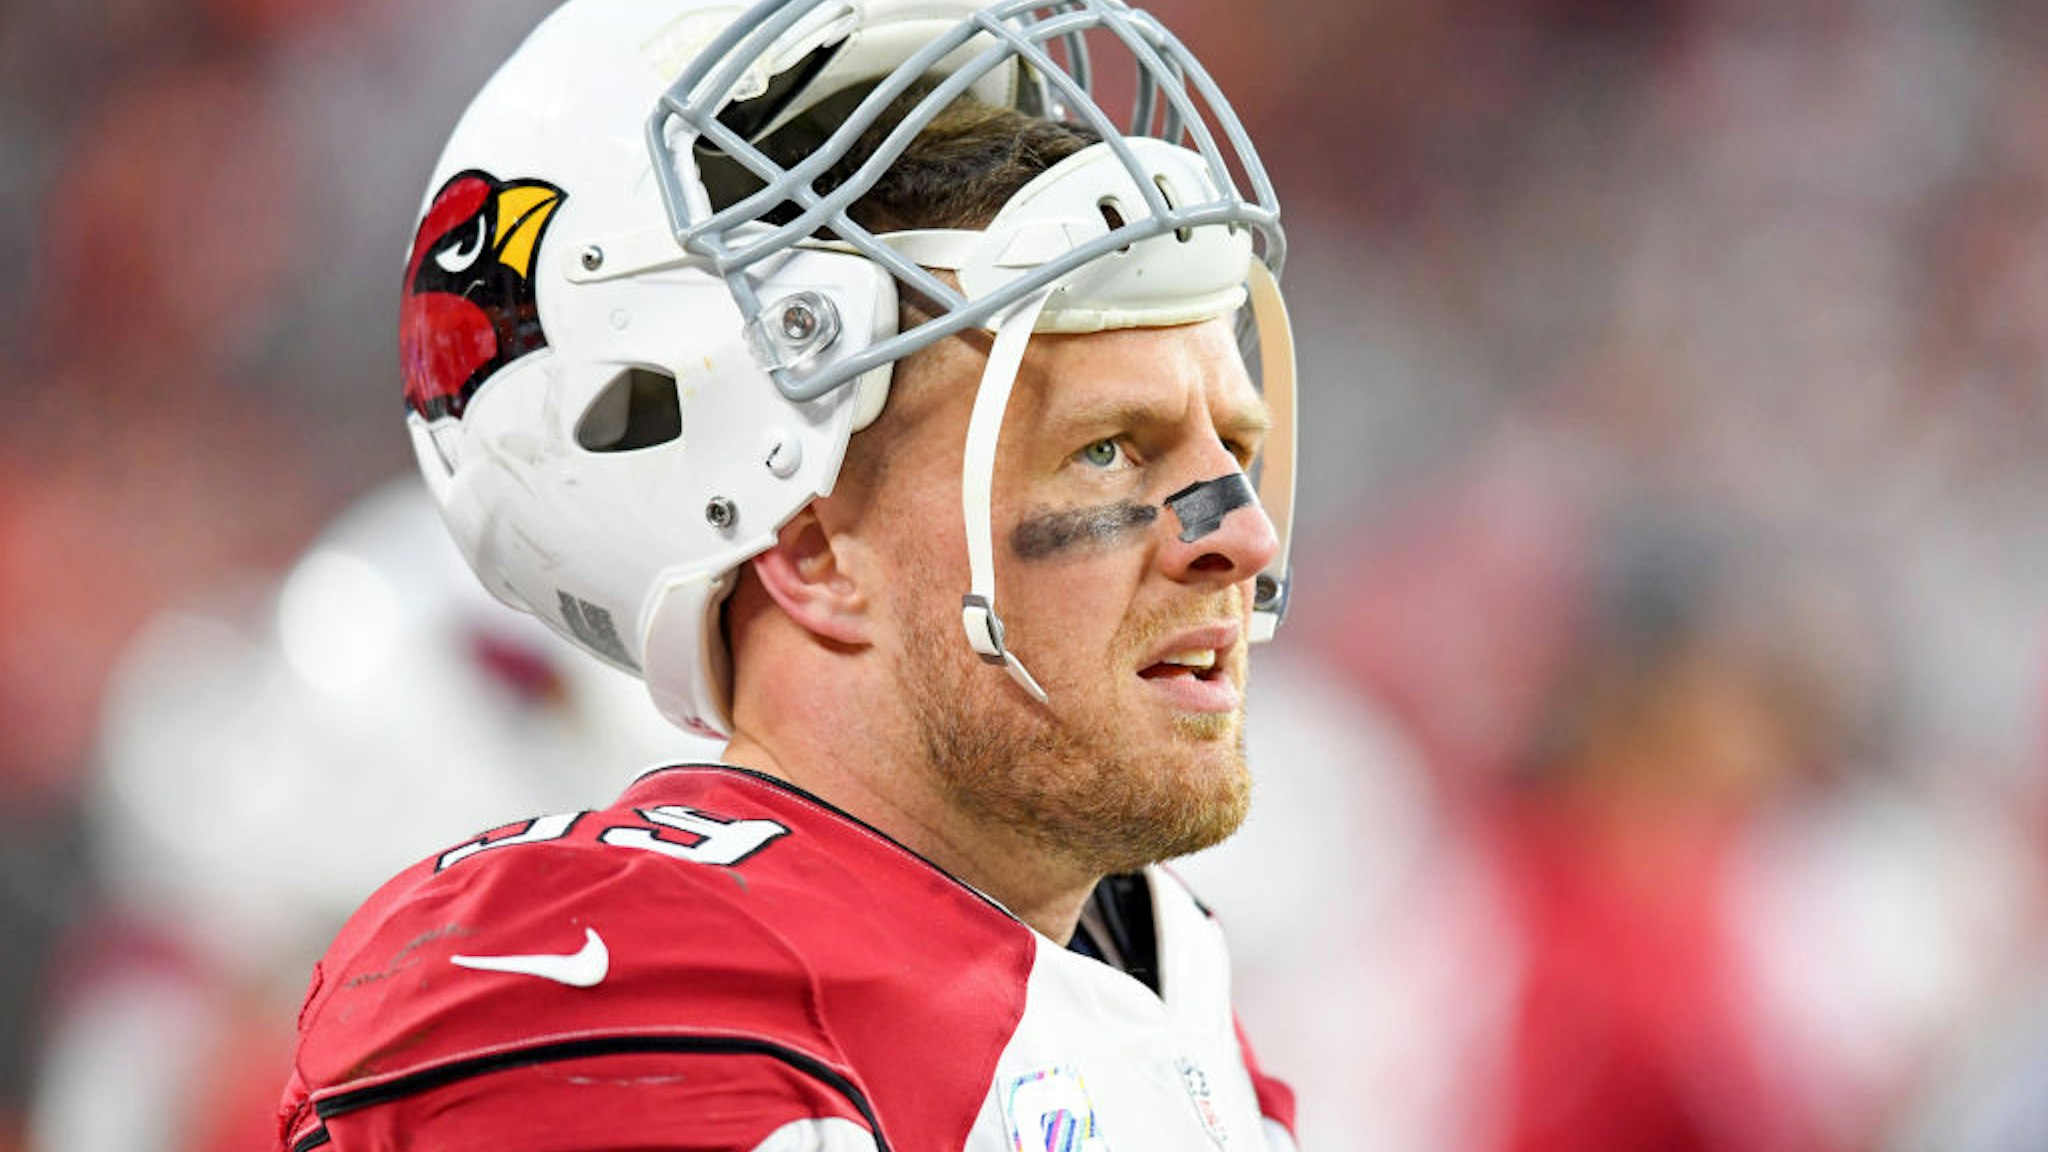 CLEVELAND, OH - OCTOBER 17: J.J. Watt #99 of the Arizona Cardinals looks on in the fourth quarter against the Cleveland Browns at FirstEnergy Stadium on October 17, 2021 in Cleveland, Ohio. (Photo by Nick Cammett/Diamond Images via Getty Images)